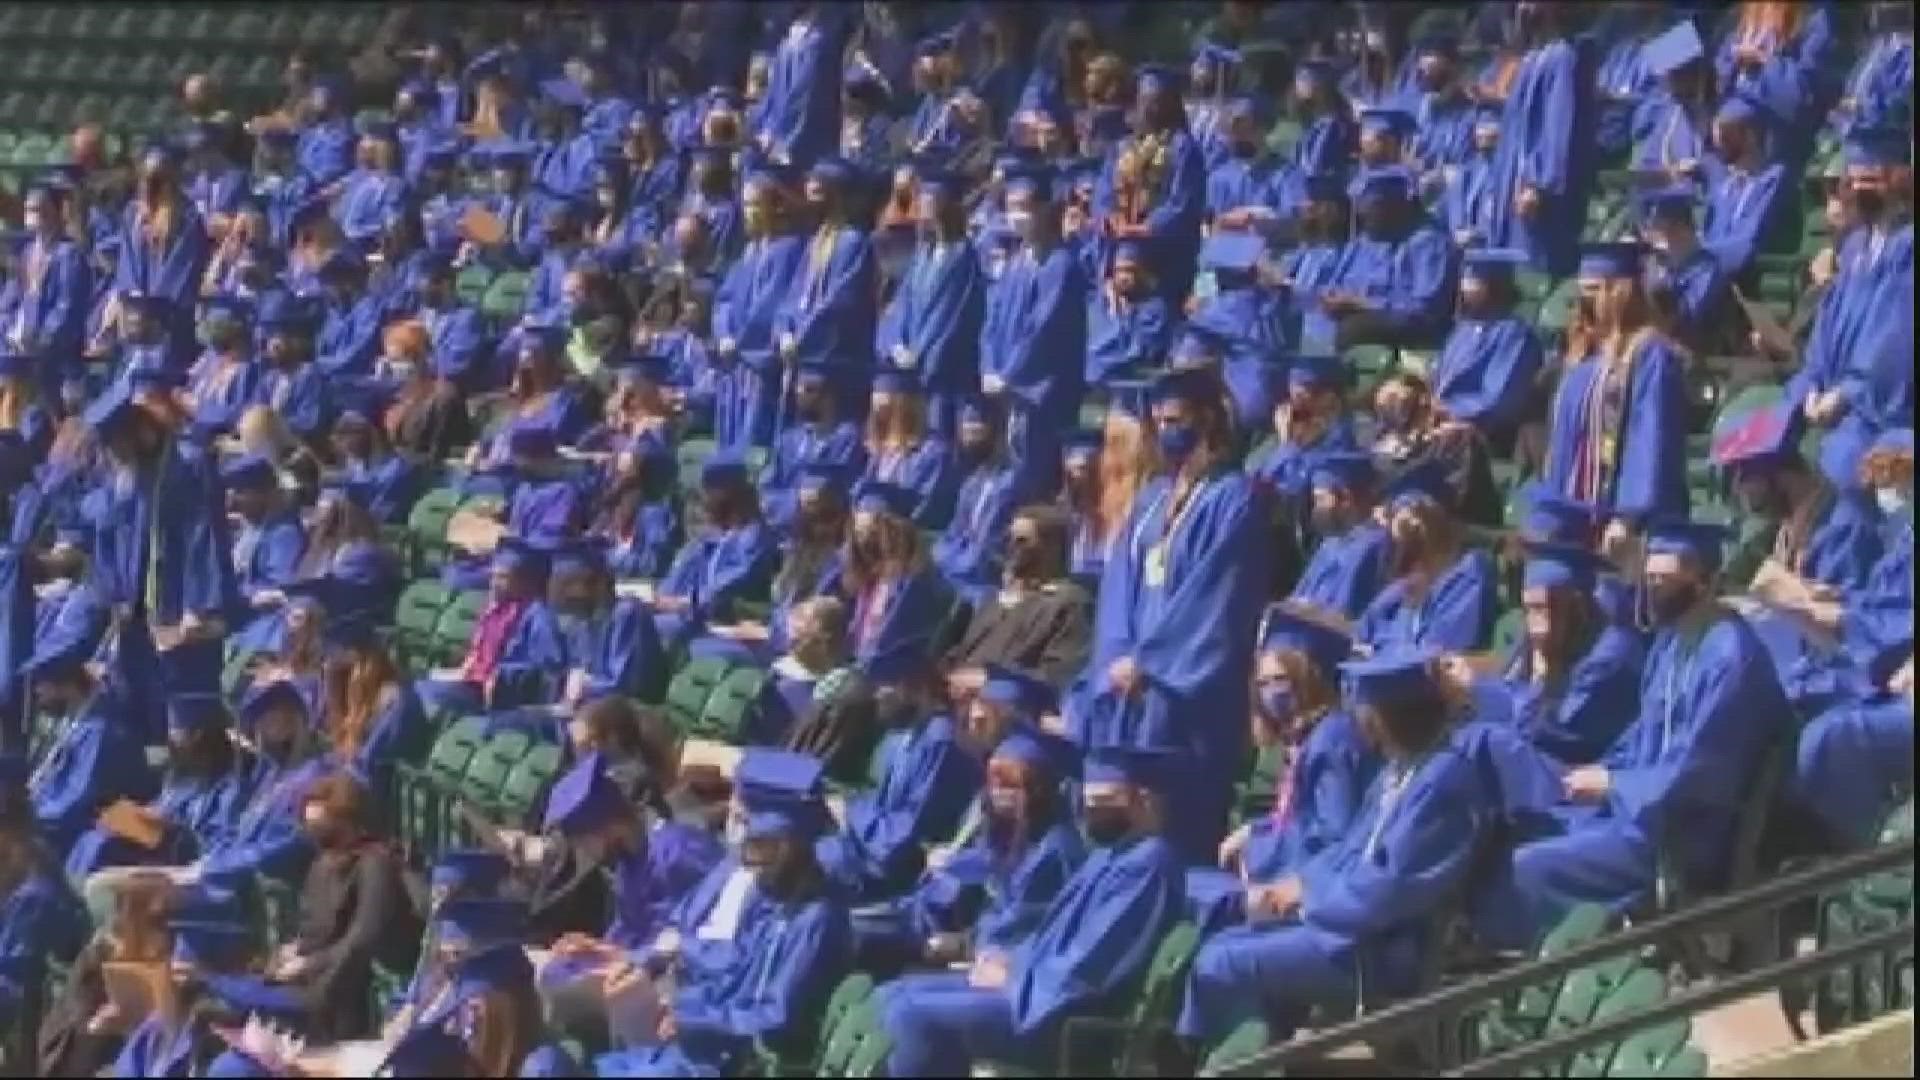 Oregon's latest high school graduation rate was released on Thursday. The percentage went from 80.6% in 2021 to 81.3% in 2022.